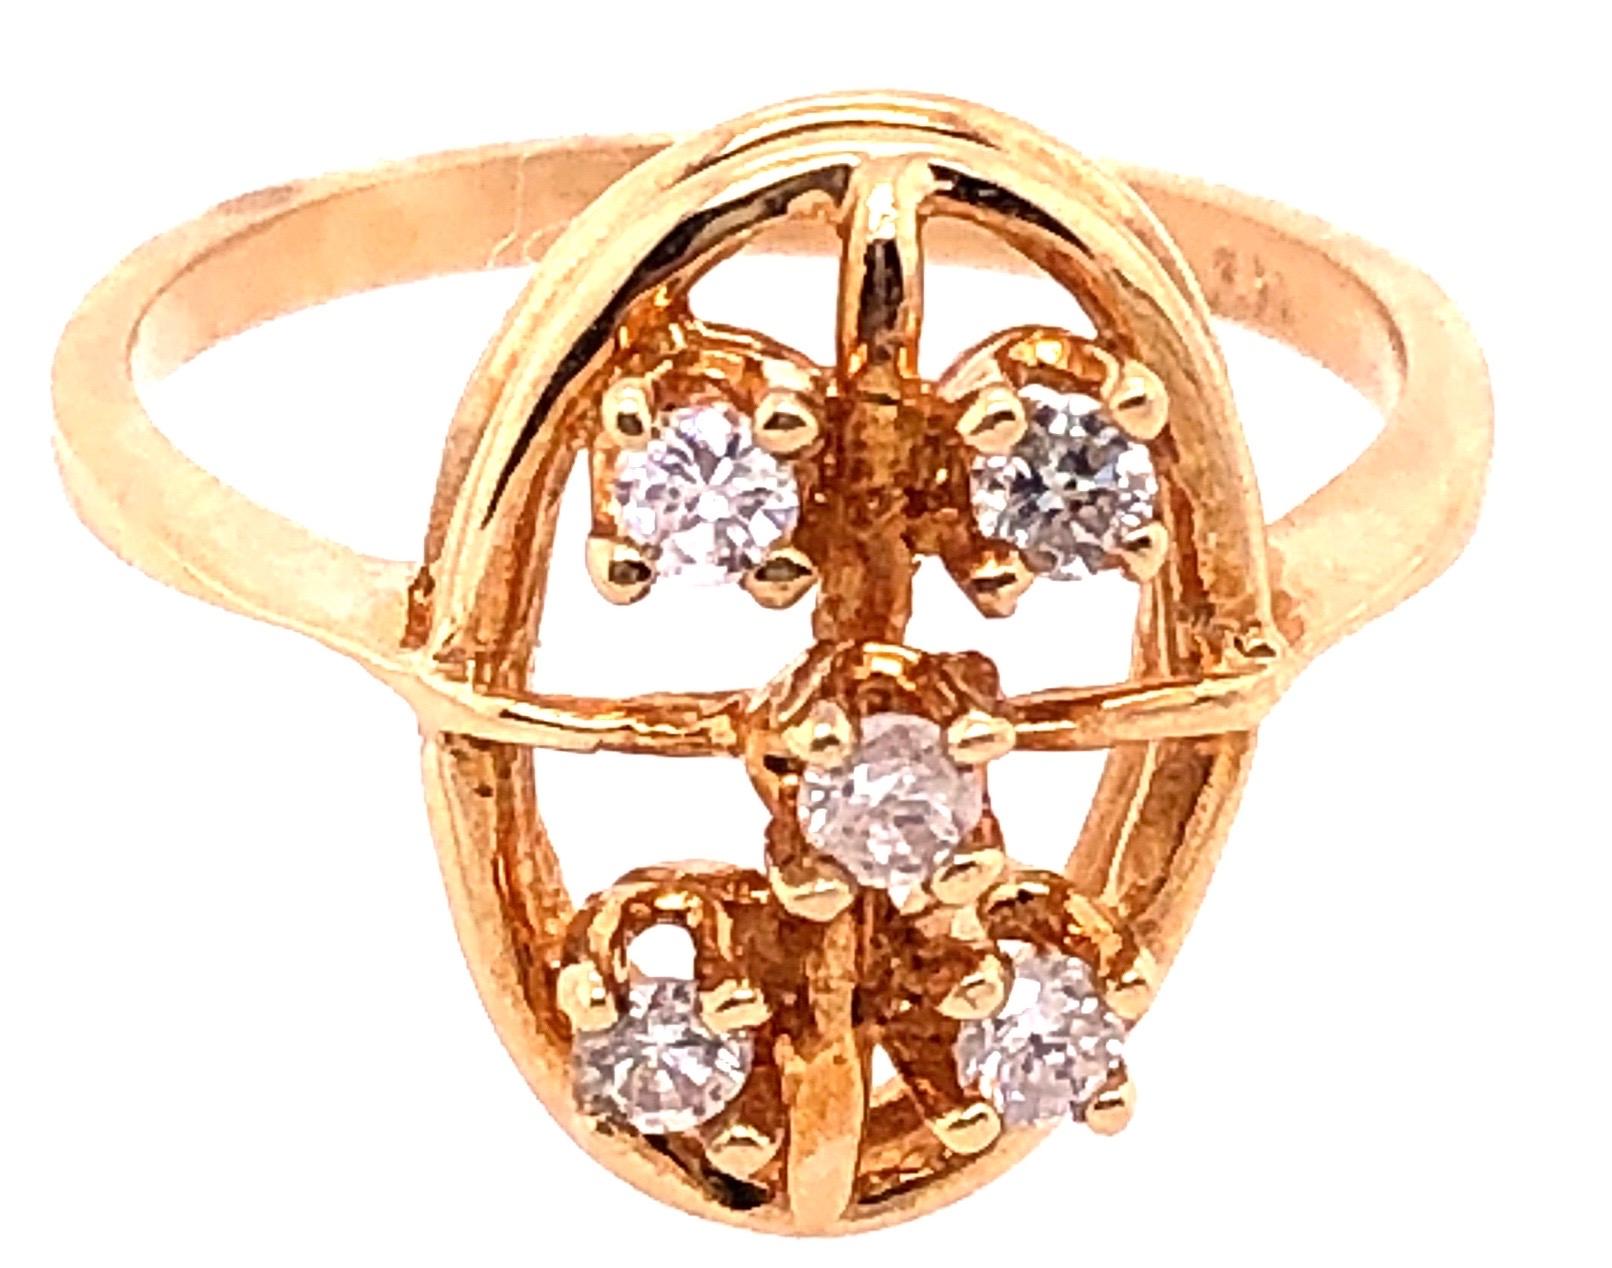 14 Karat Yellow Gold Contemporary Ring ith Diamonds 0.50 Total Diamond Weight.
Size 7
3 grams total weight.